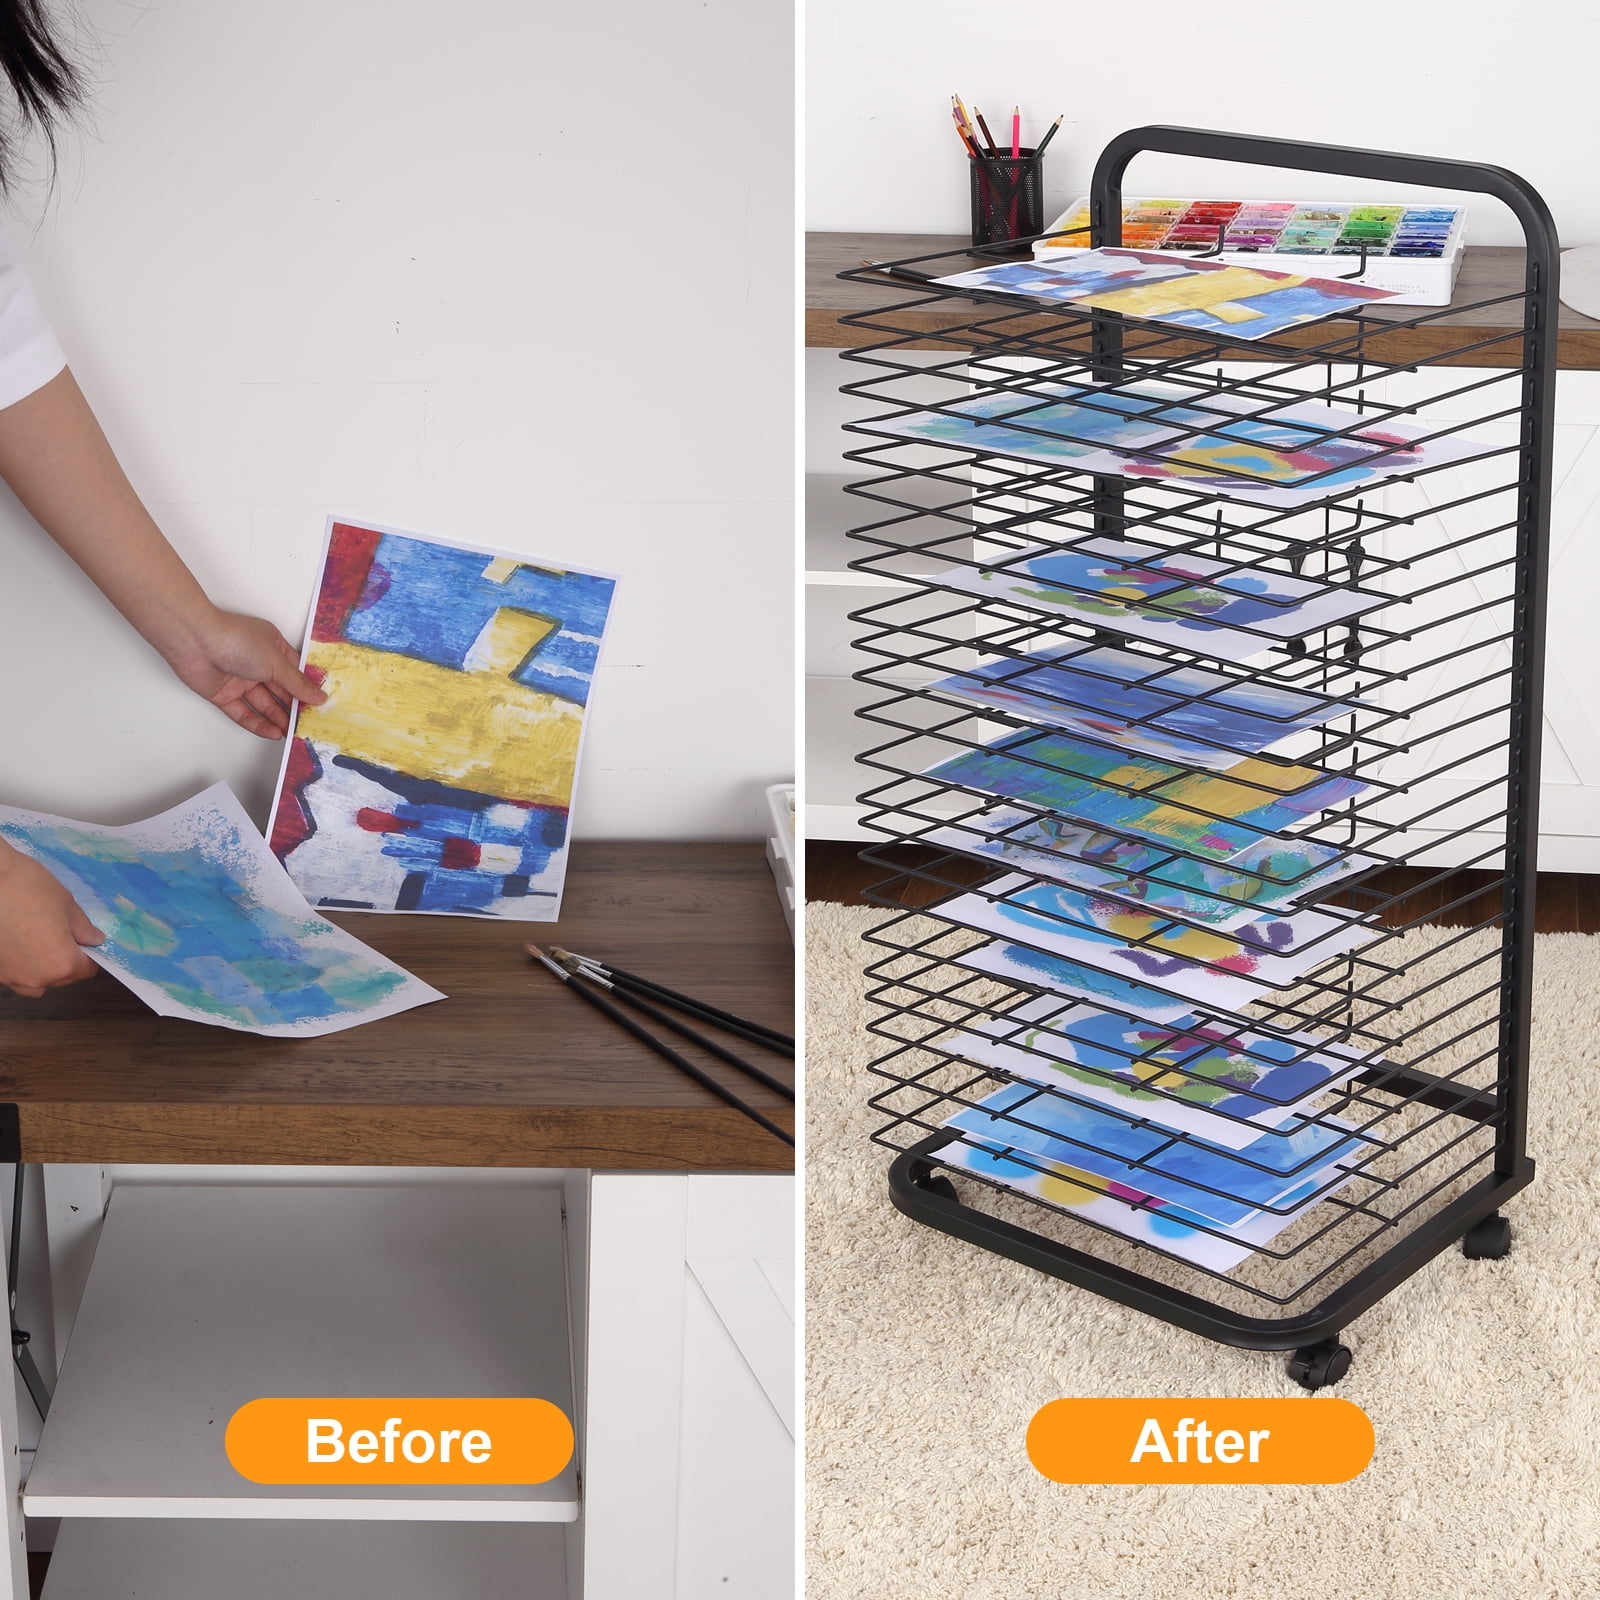 Joymaney New Art Drying Rack for Classrooms, No Shelves Fall Out, 25  Removable Shelves, Mobile, Sturdy Metal, Ideal for Schools,Art, Preschool;  Height